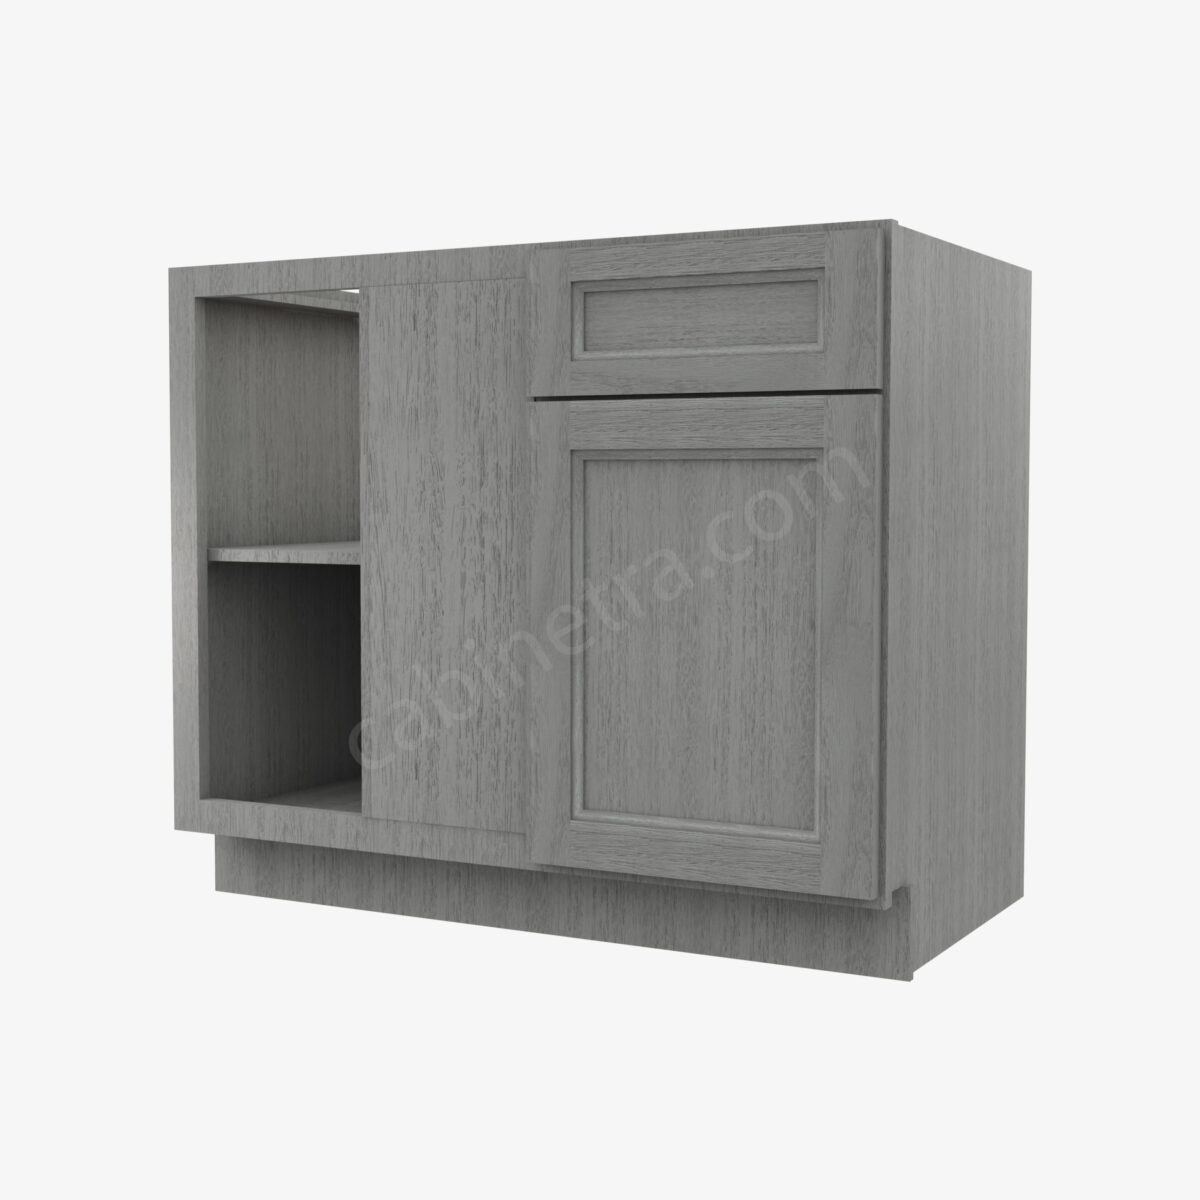 TG BBLC42 45 39W 0 Forevermark Midtown Grey Cabinetra scaled